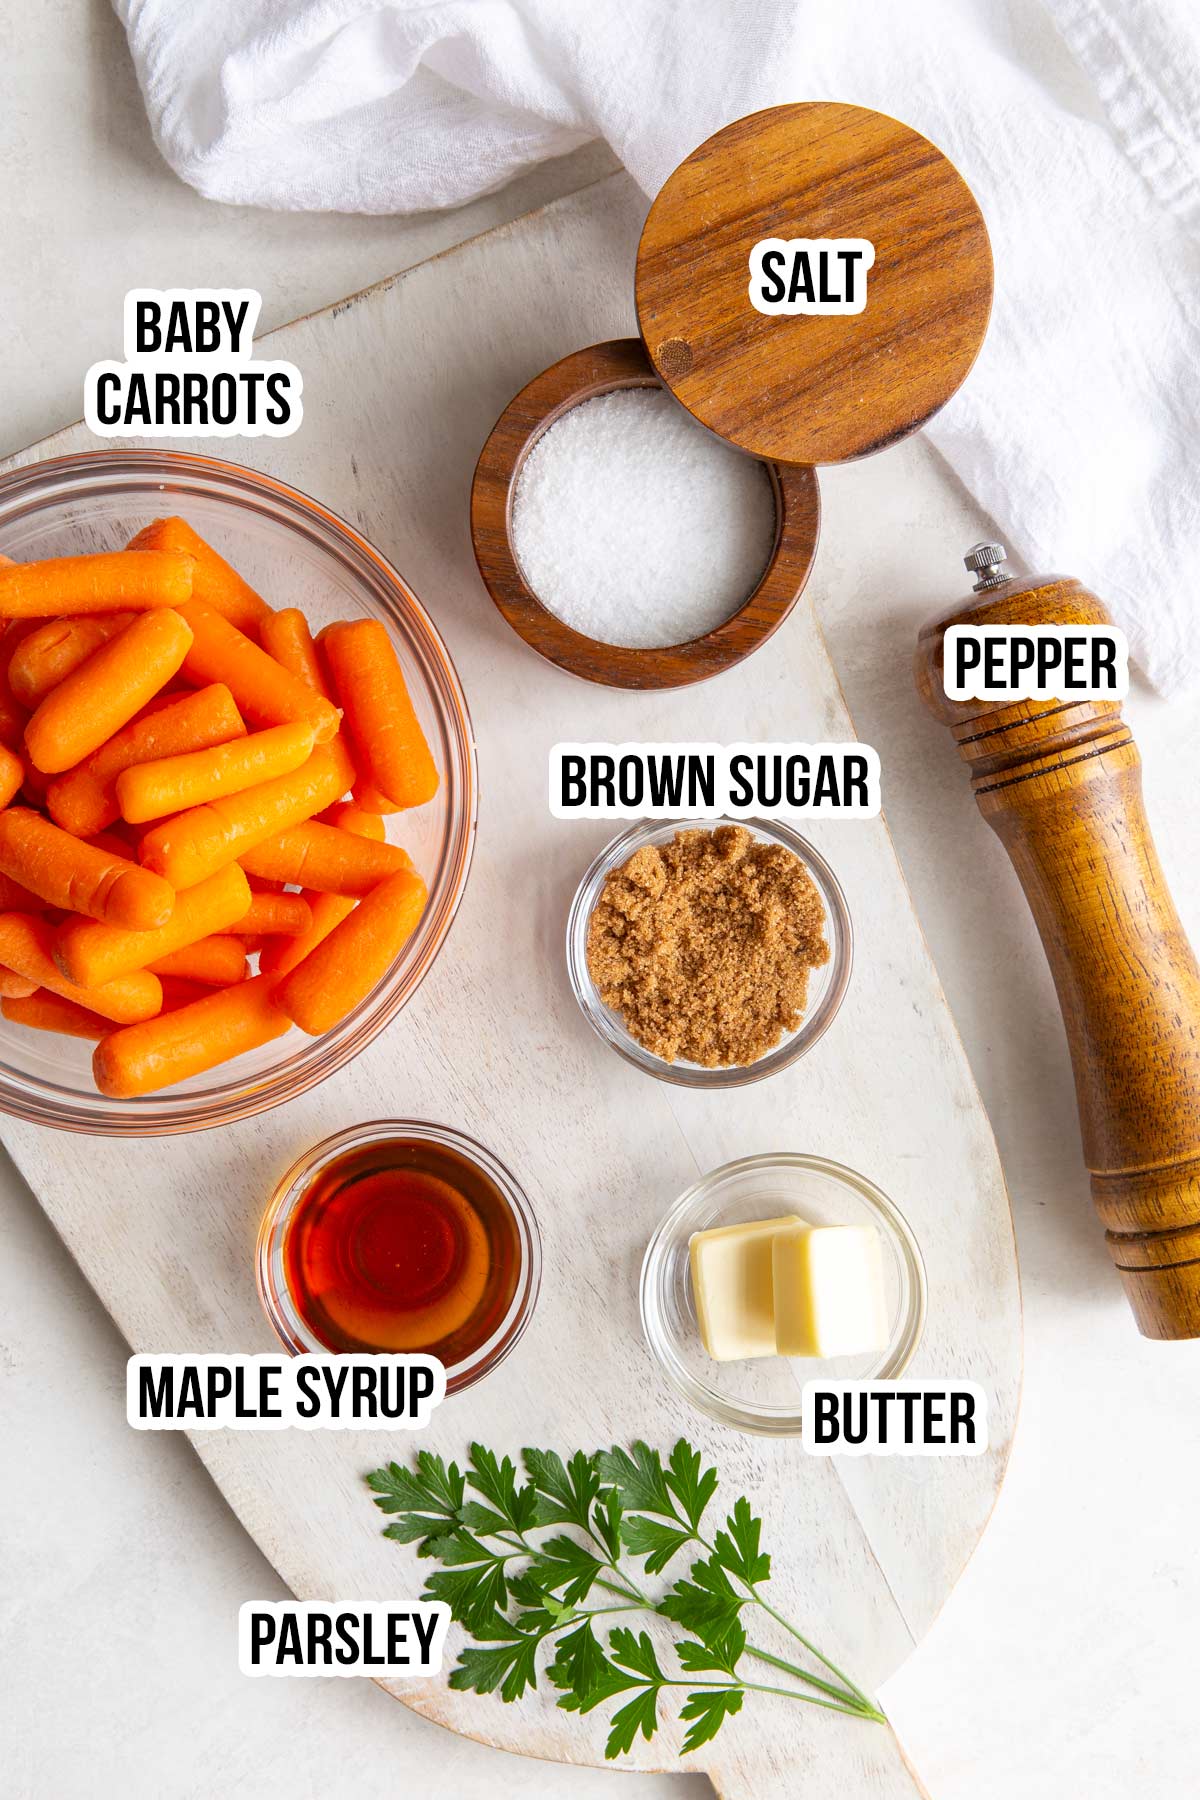 Overhead view of ingredients for making maple glazed carrots with overlay text.